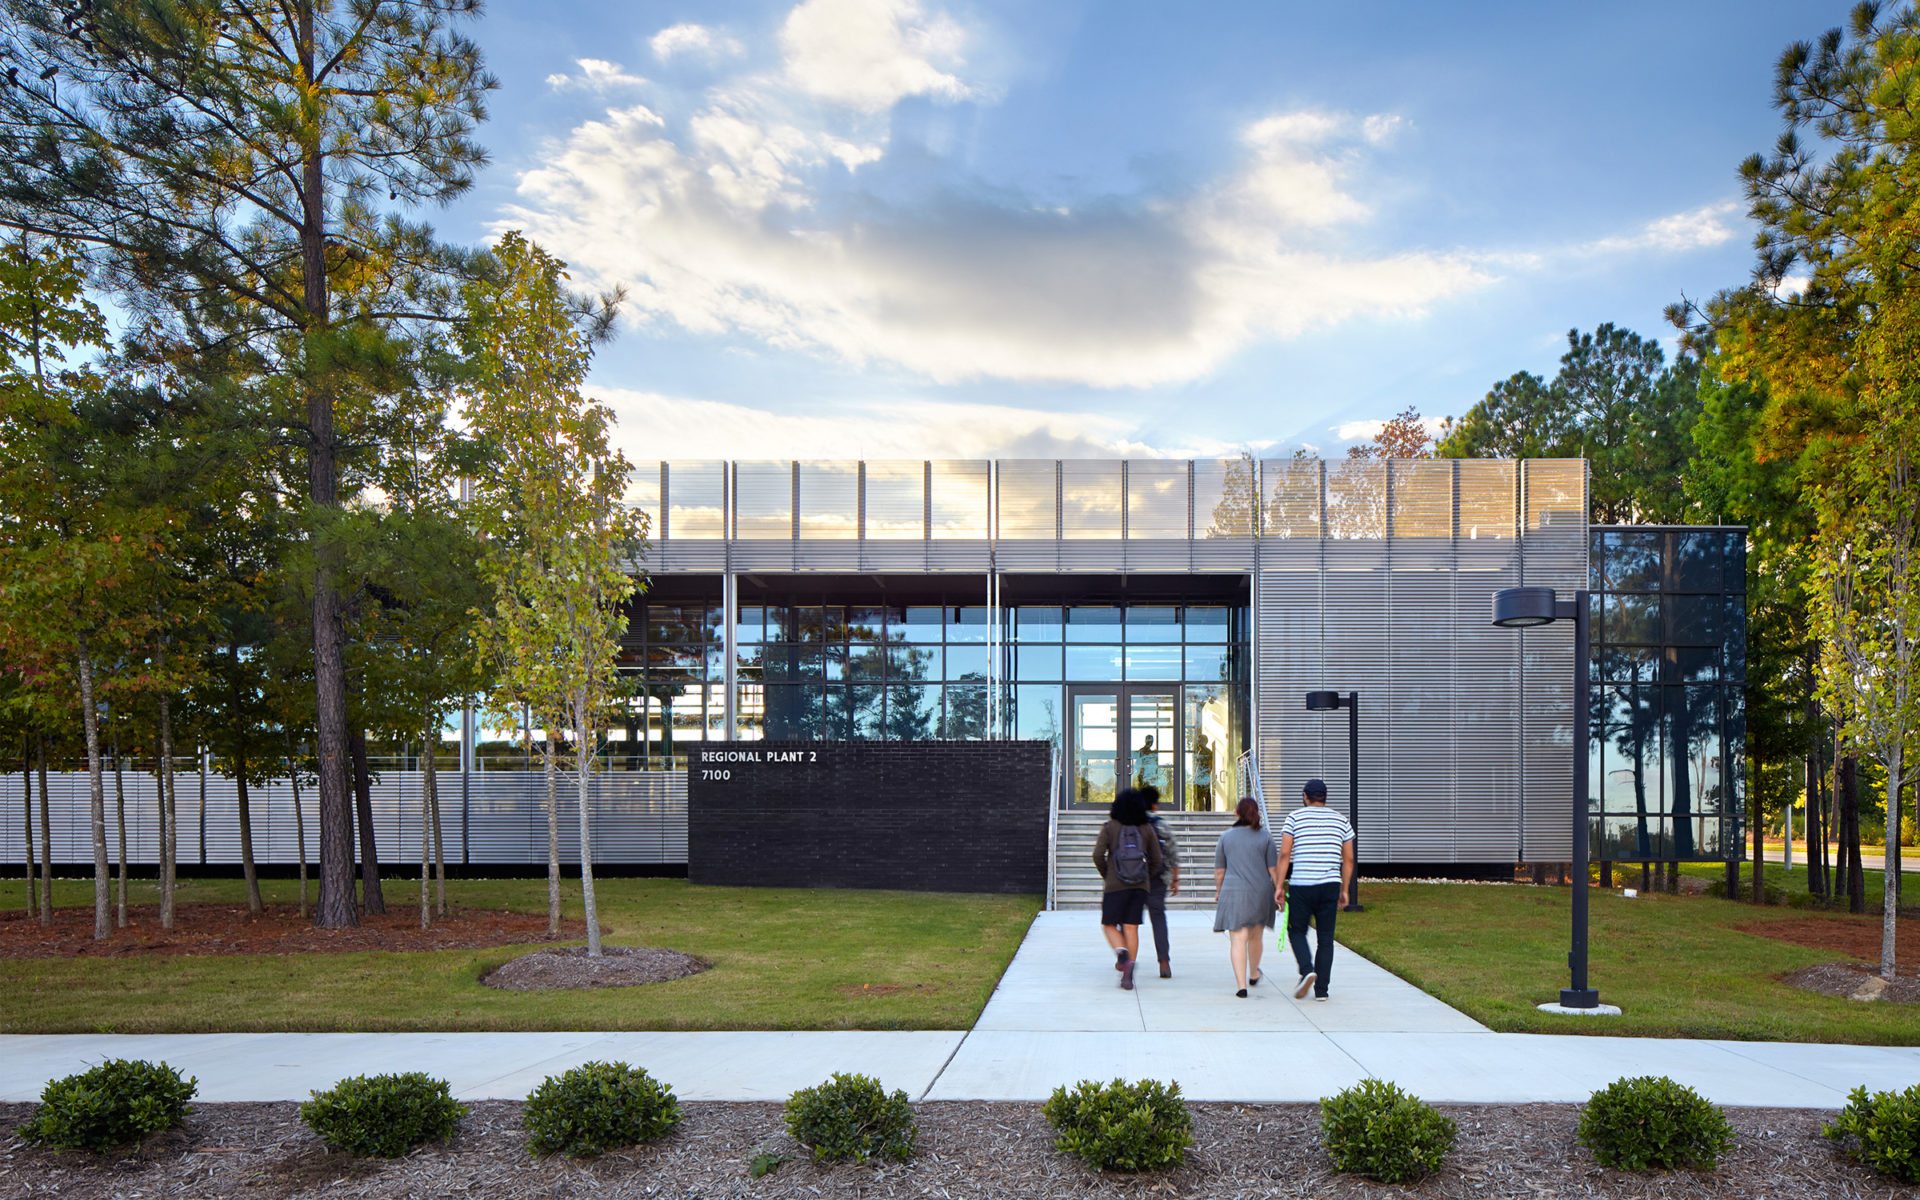 Entry approach at the Regional Plant & Teaching Facility at Wake Tech Community College in Raleigh, NC: Architect: Clark Nexsen